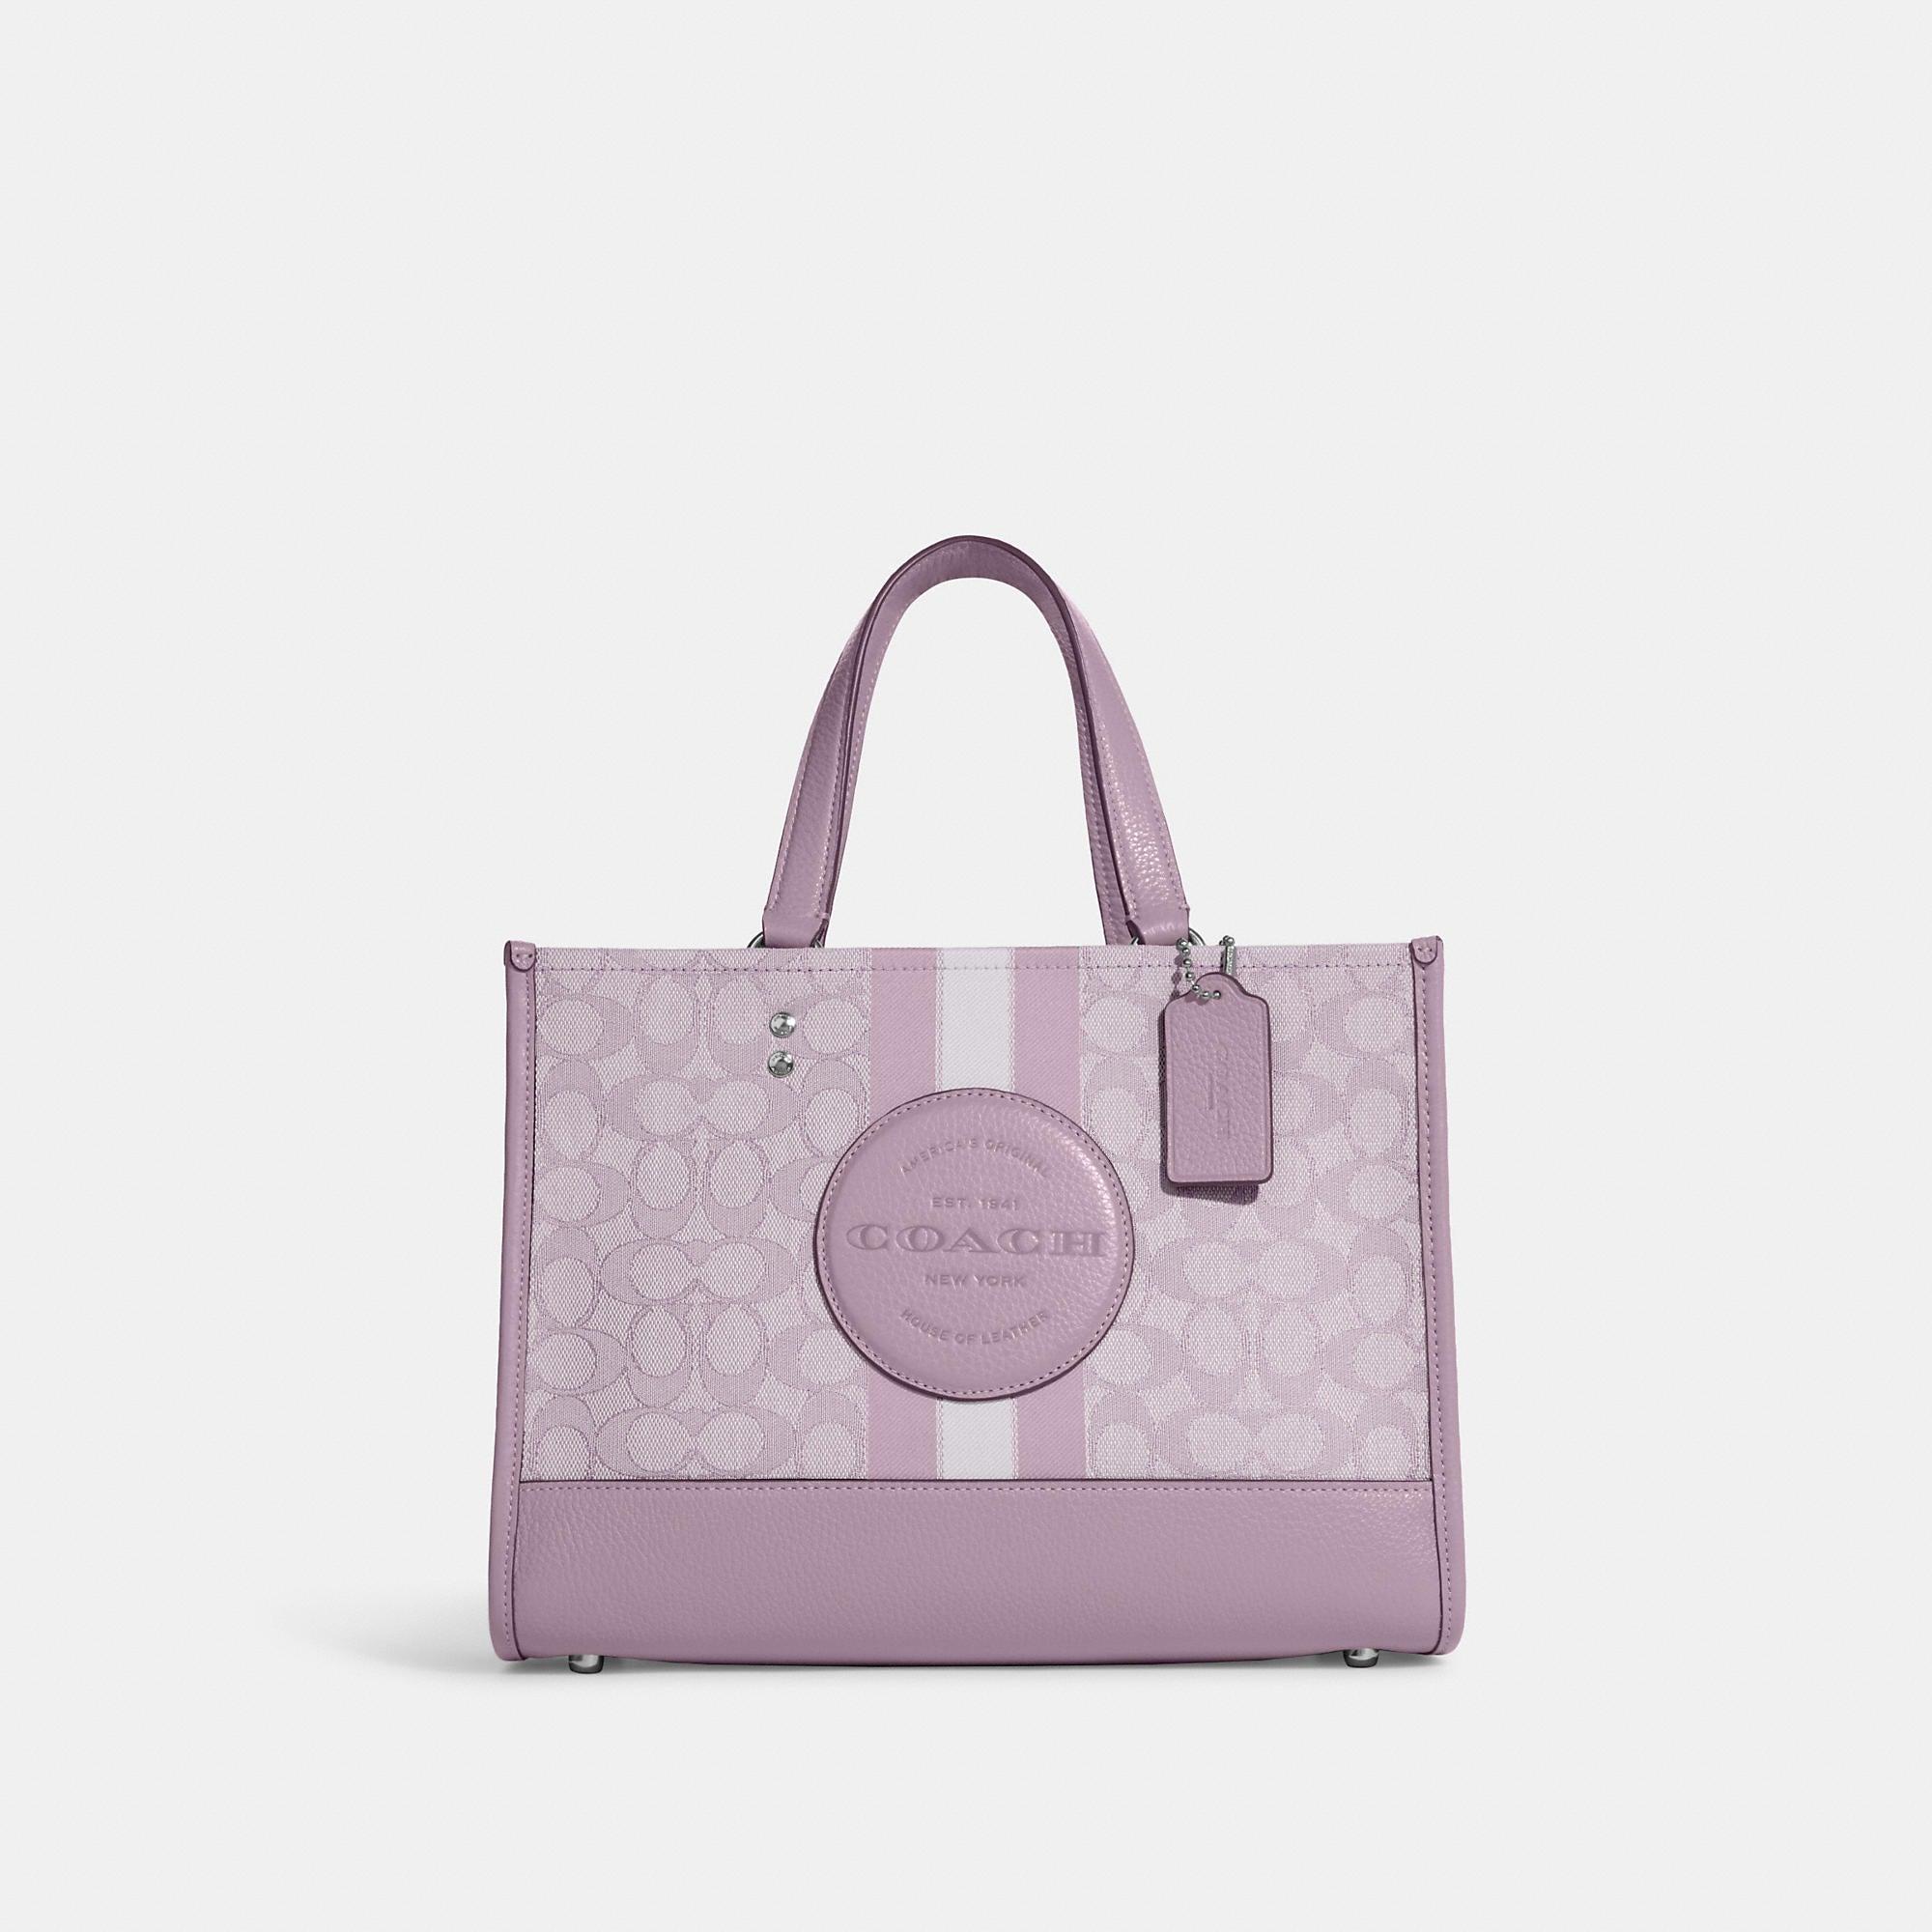 Coach Outlet Dempsey File Bag in Purple